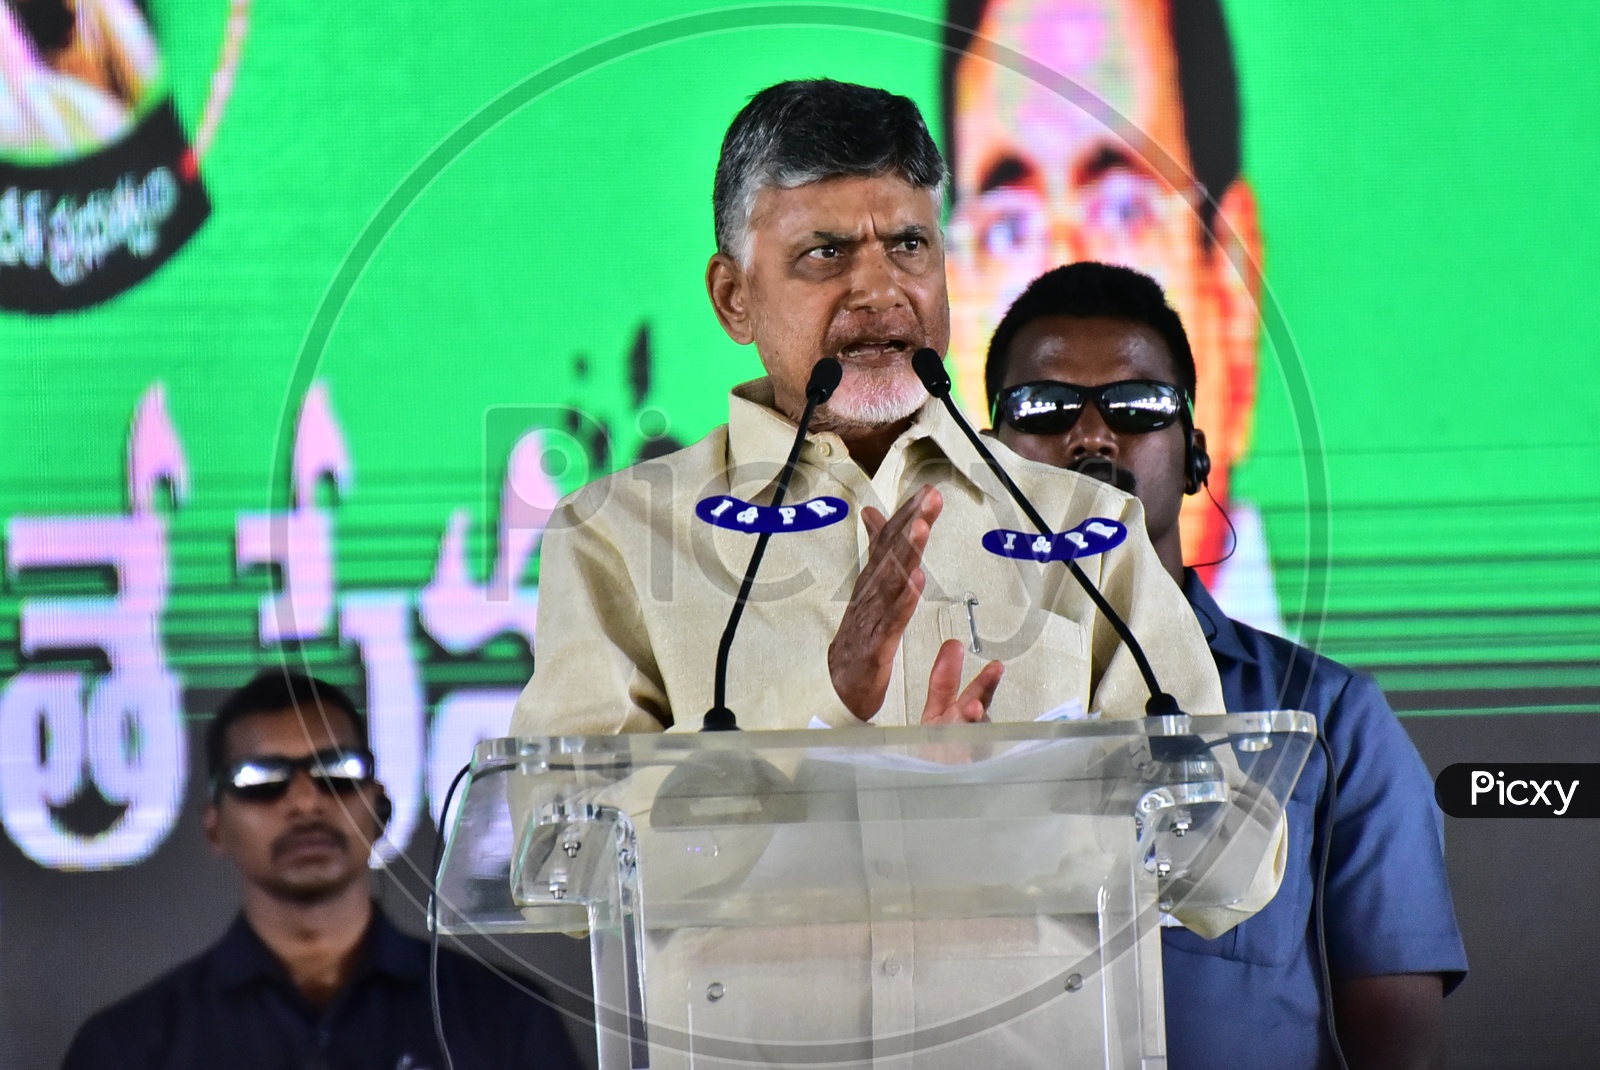 AP Chief Minister Chandra Babu Naidu during the launch of Swachh Andhra Mission